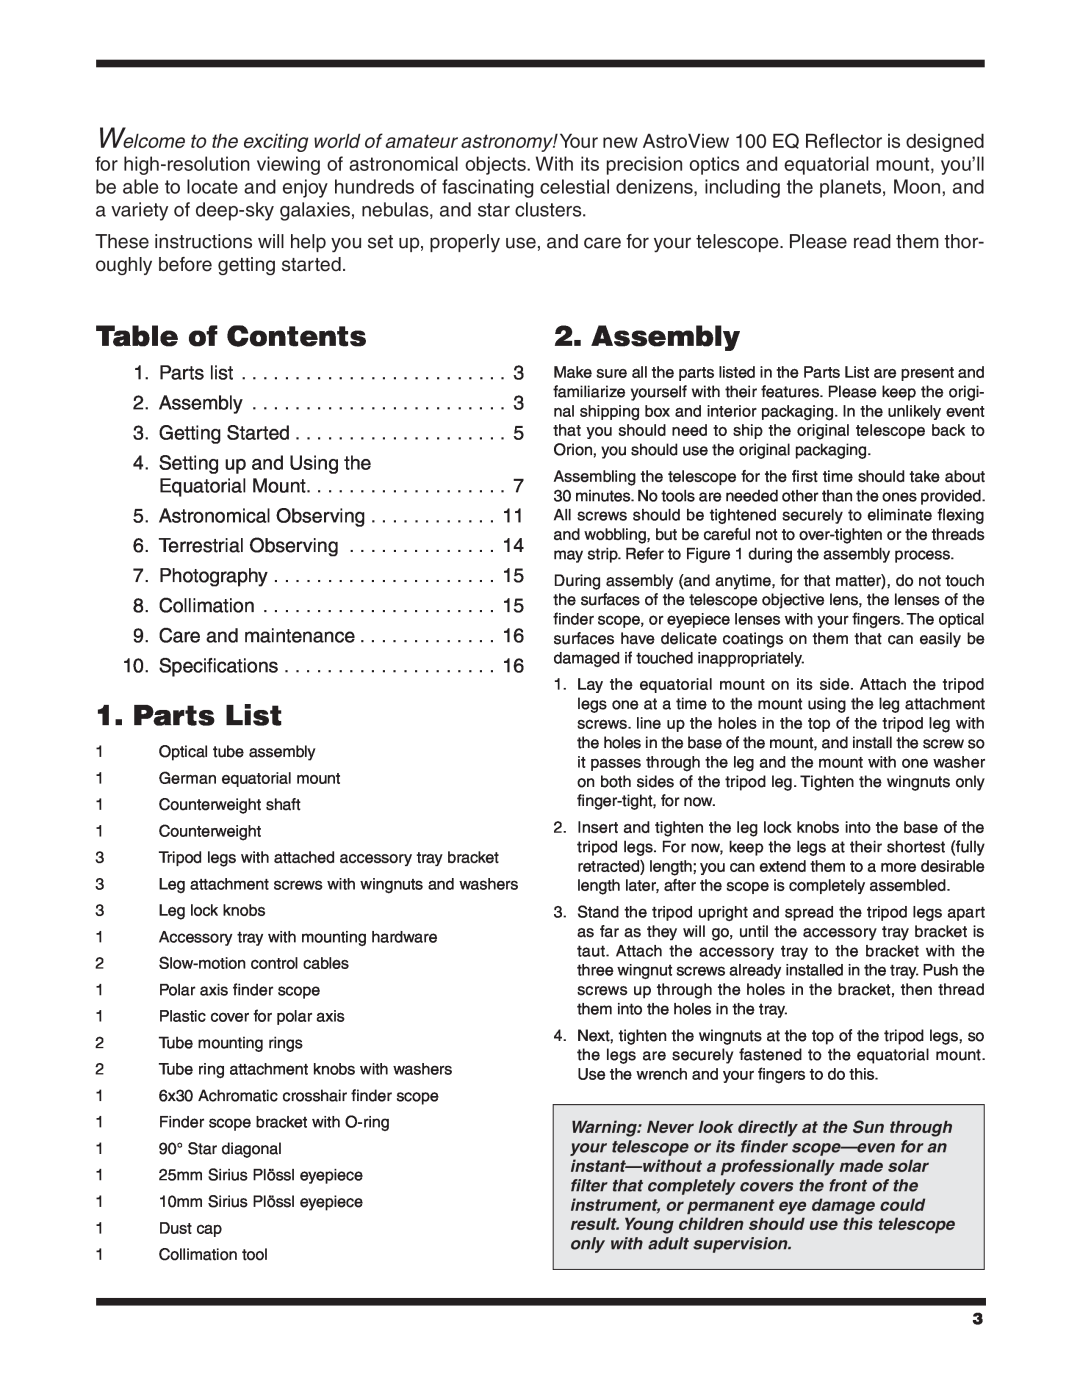 Orion 9862 instruction manual Table of Contents, Assembly, Parts List 